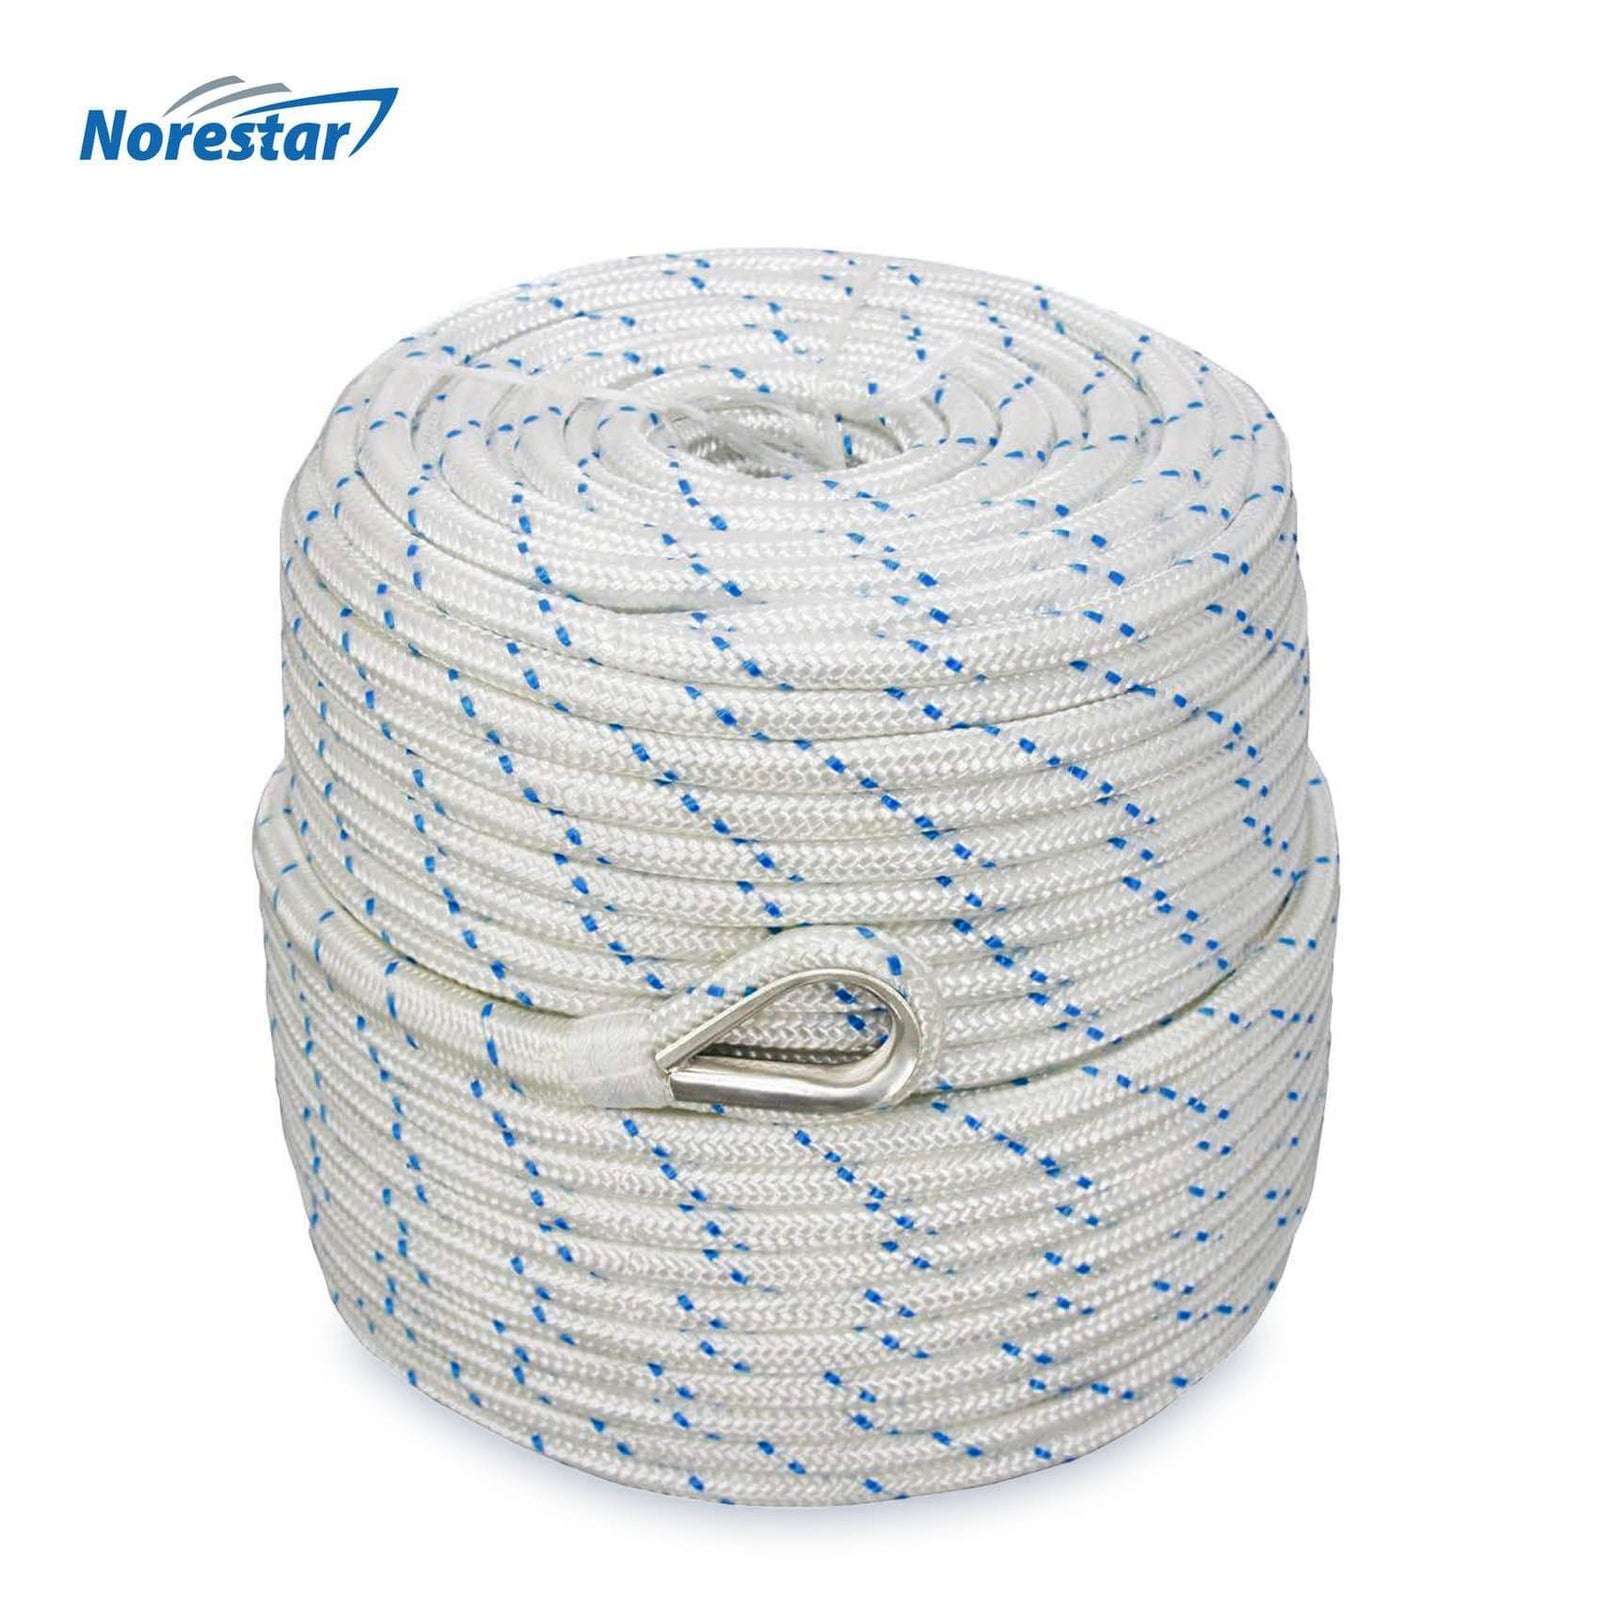 Norestar Double-Braided Nylon Anchor Rope - 3/8"